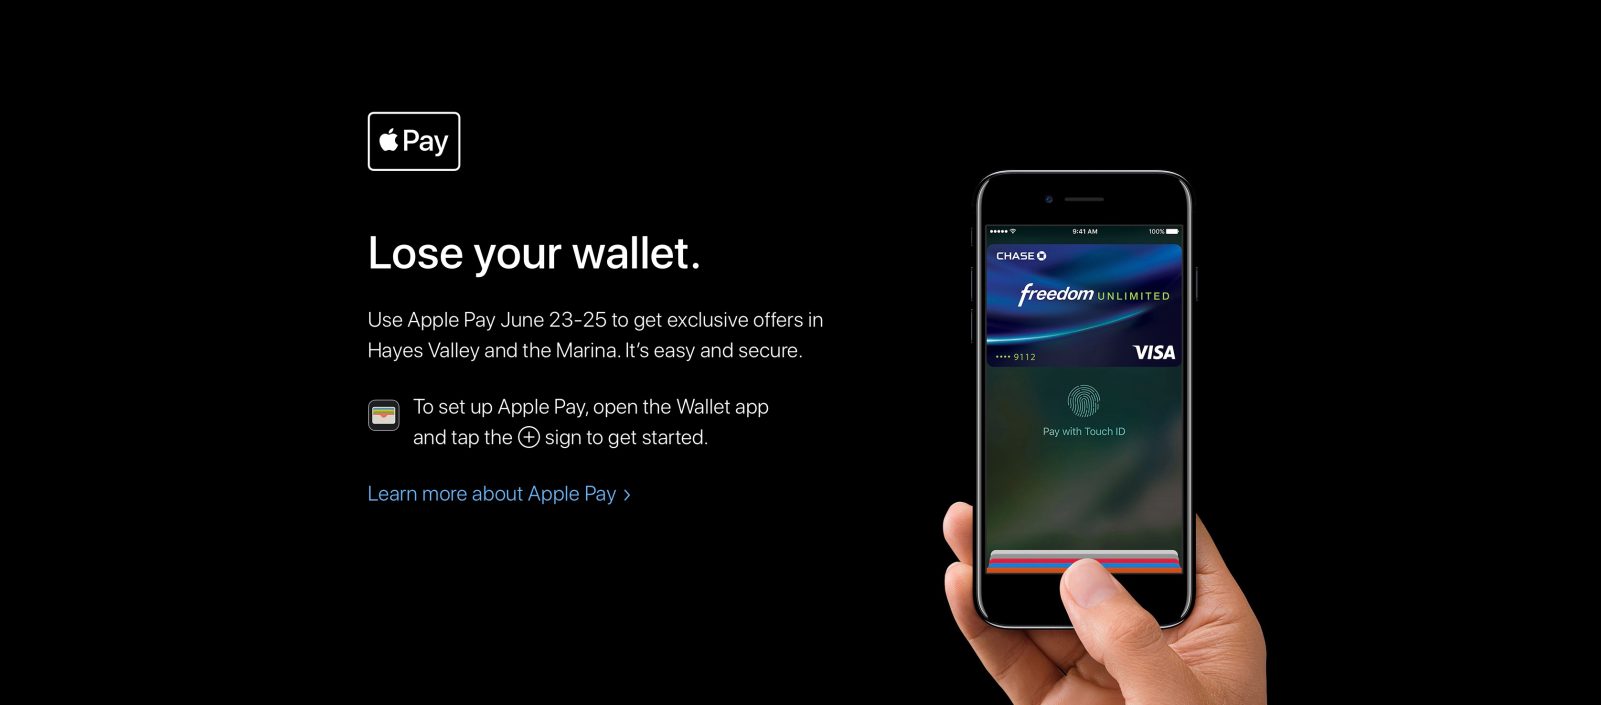 Apple Holding ‘Lose Your Wallet’ Shopping Event Promoting Apple Pay